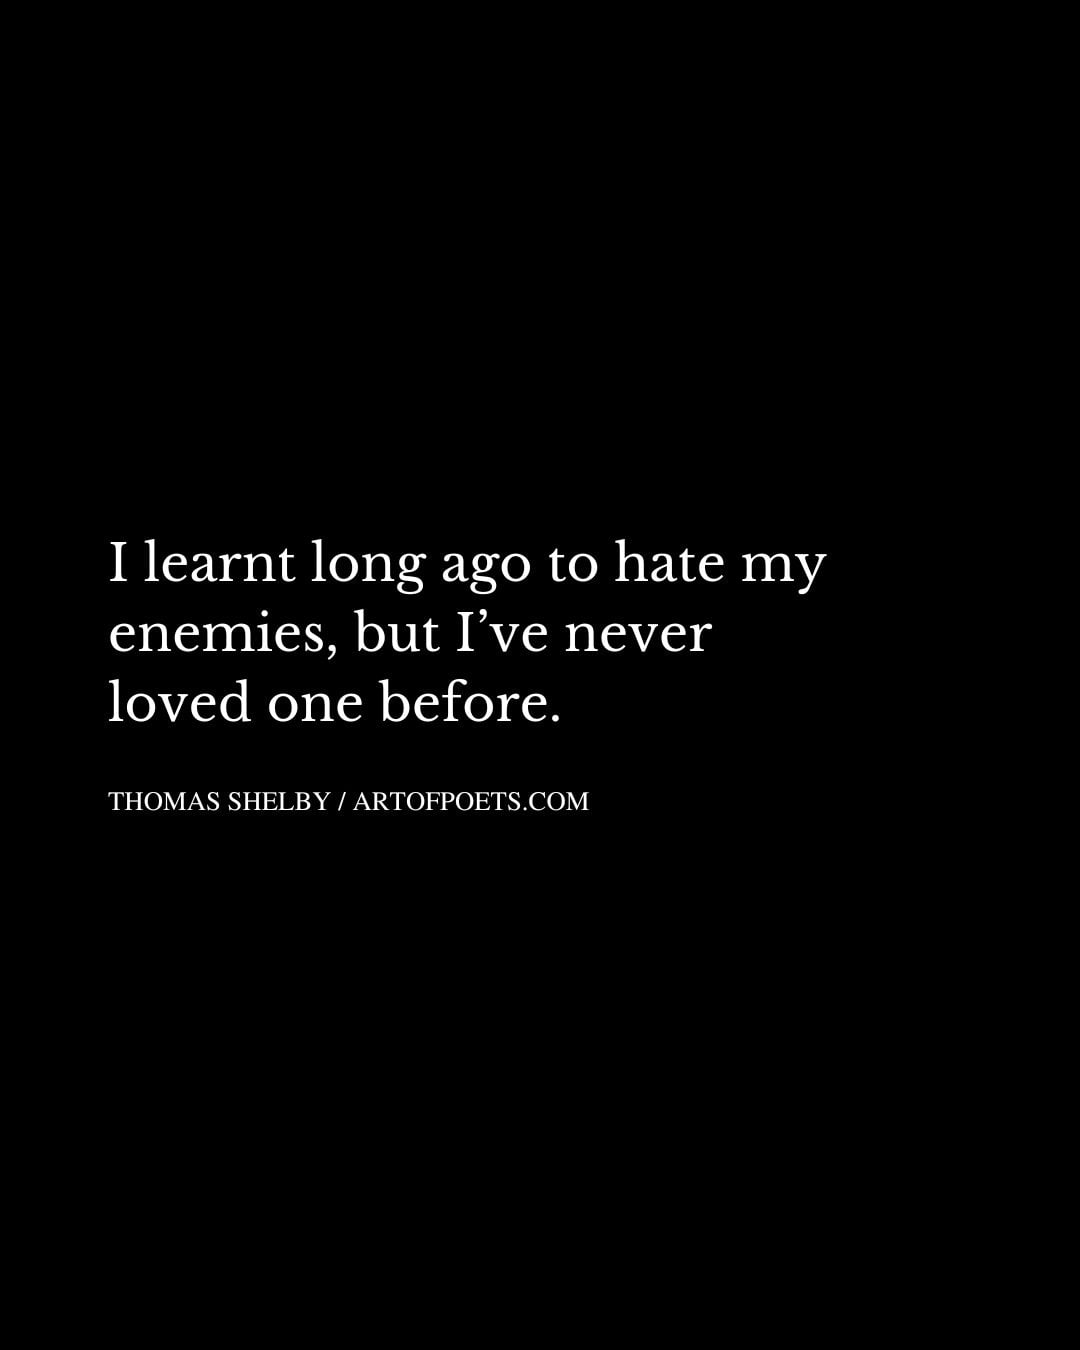 I learnt long ago to hate my enemies but Ive never loved one before